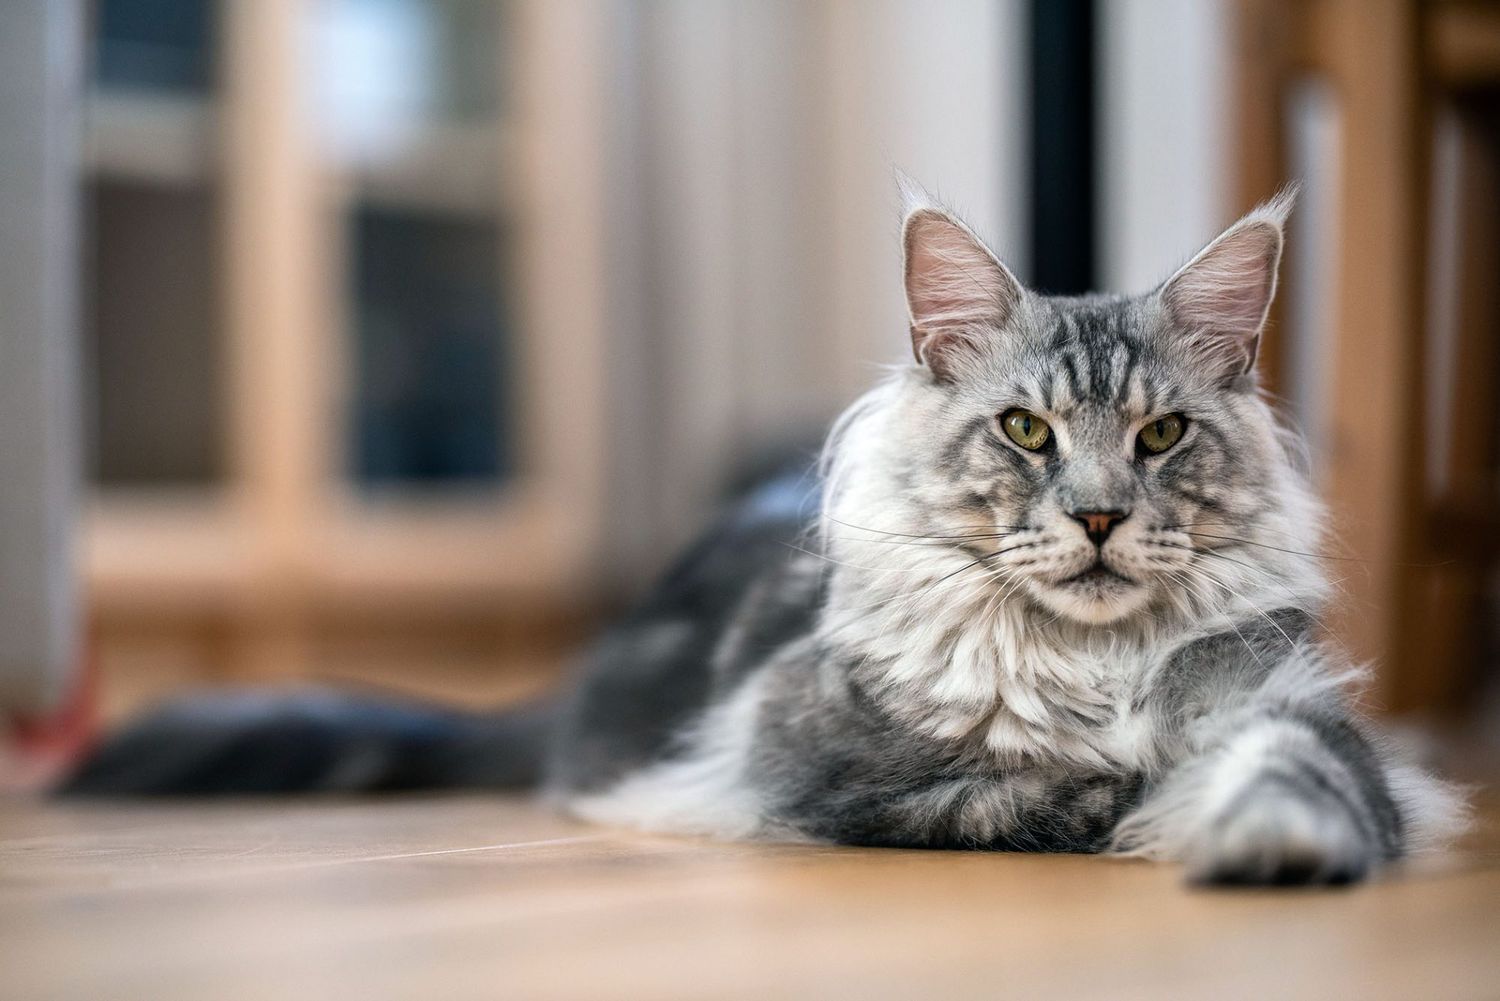 10 Large Cat Breeds That Give You More to Love | Daily Paws